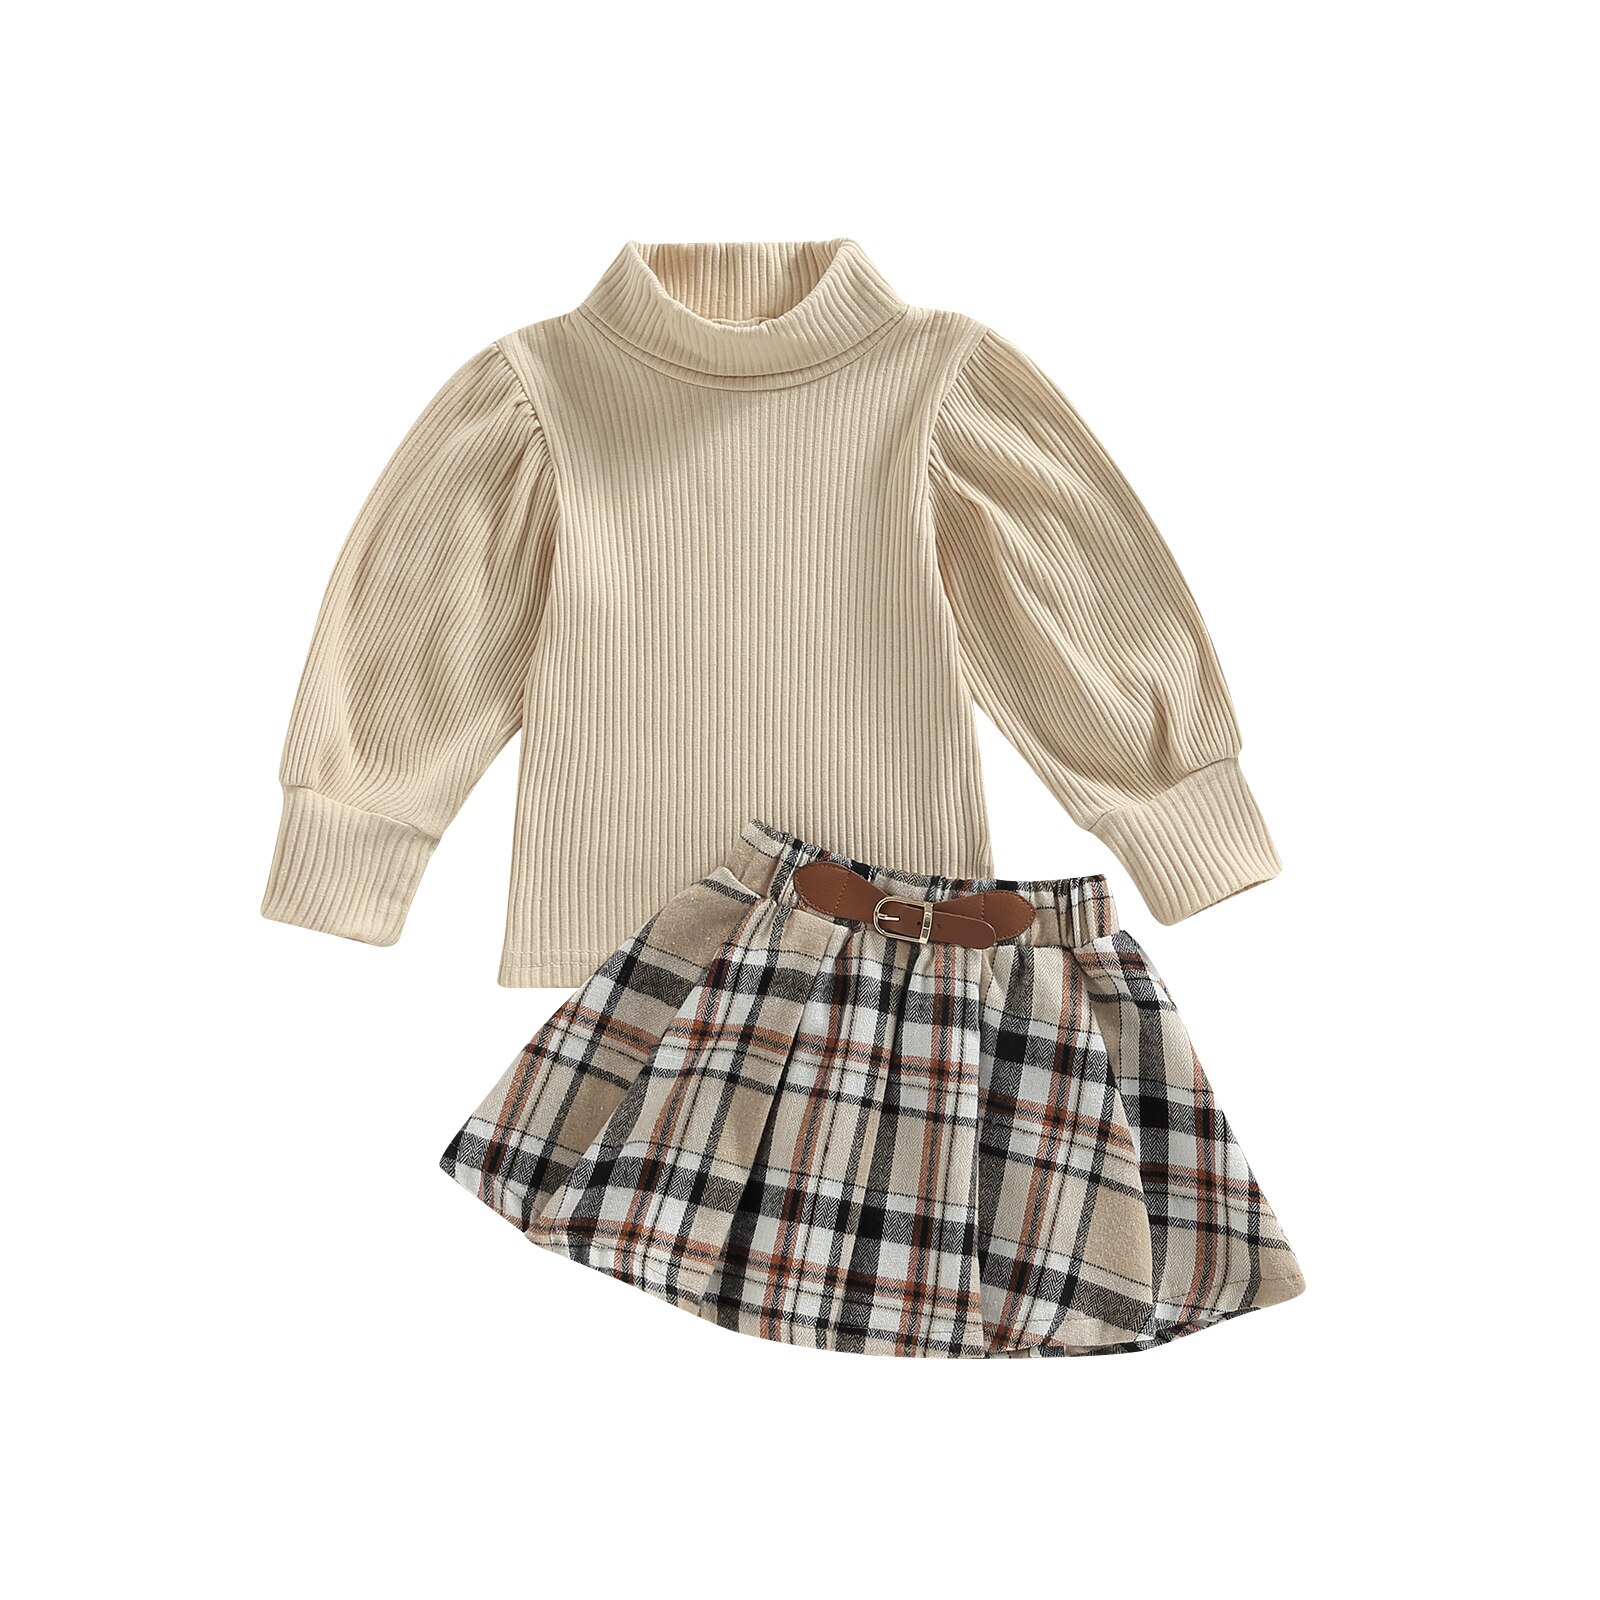 Citgeett-Autumn-Kids-Toddler-Girls-Outfit-Sets-Solid-Color-Long-Sleeve-Tops-A-line-Plaid-Skirt-5